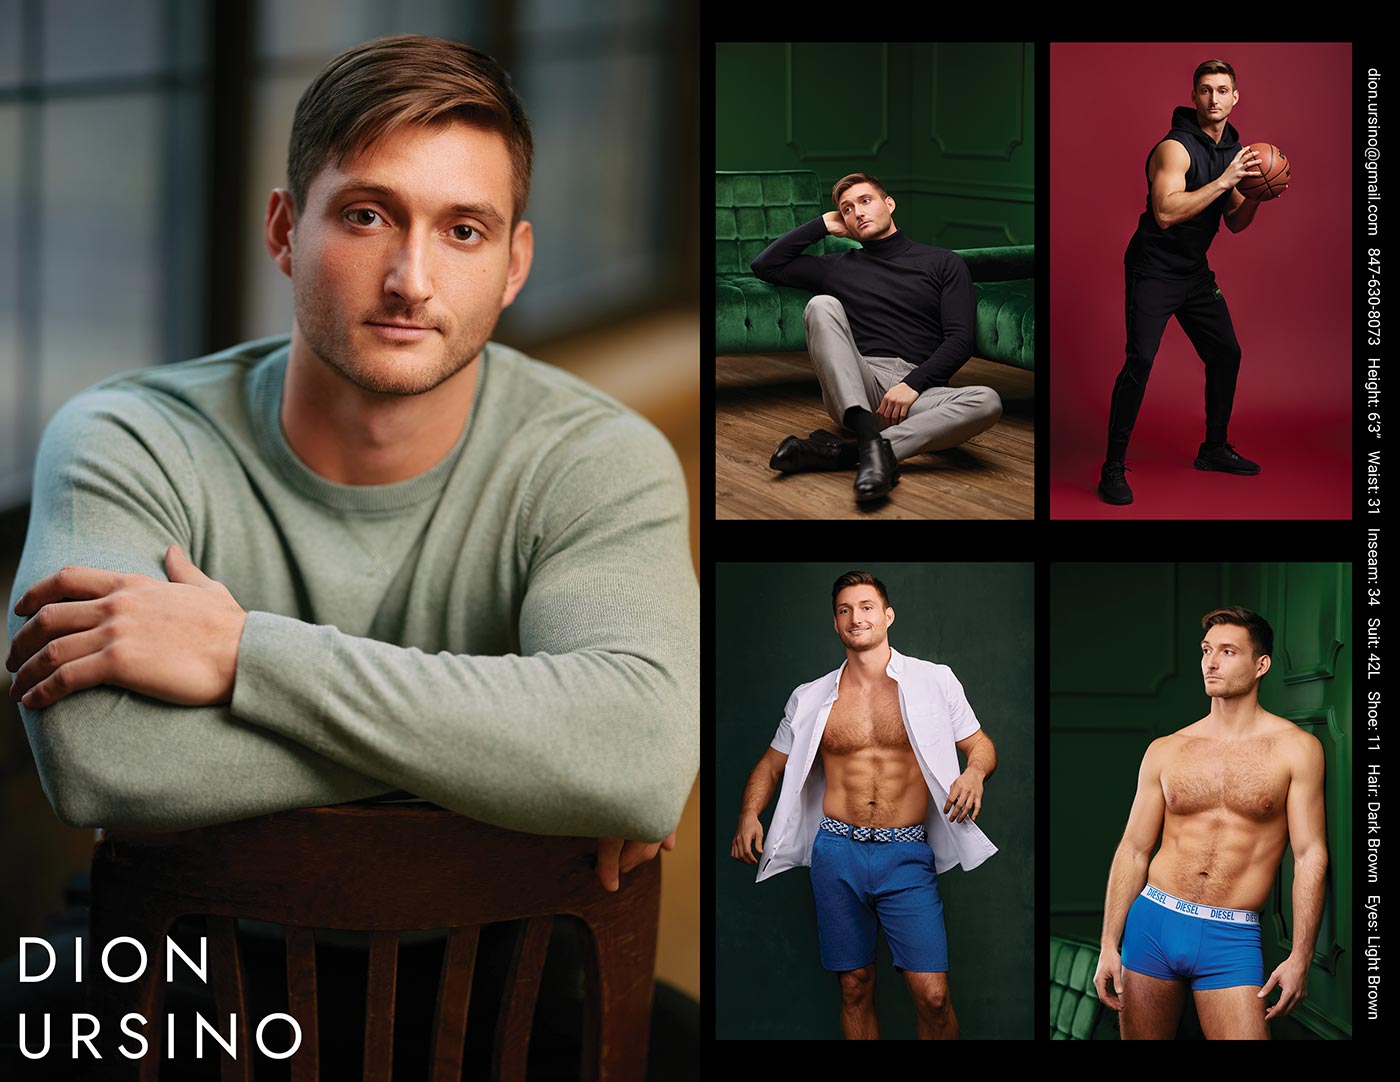 Dion's compcard showcasing a variety of looks from casual to athletic to formal, highlighting the versatility captured through model compcard photography in Chicago.